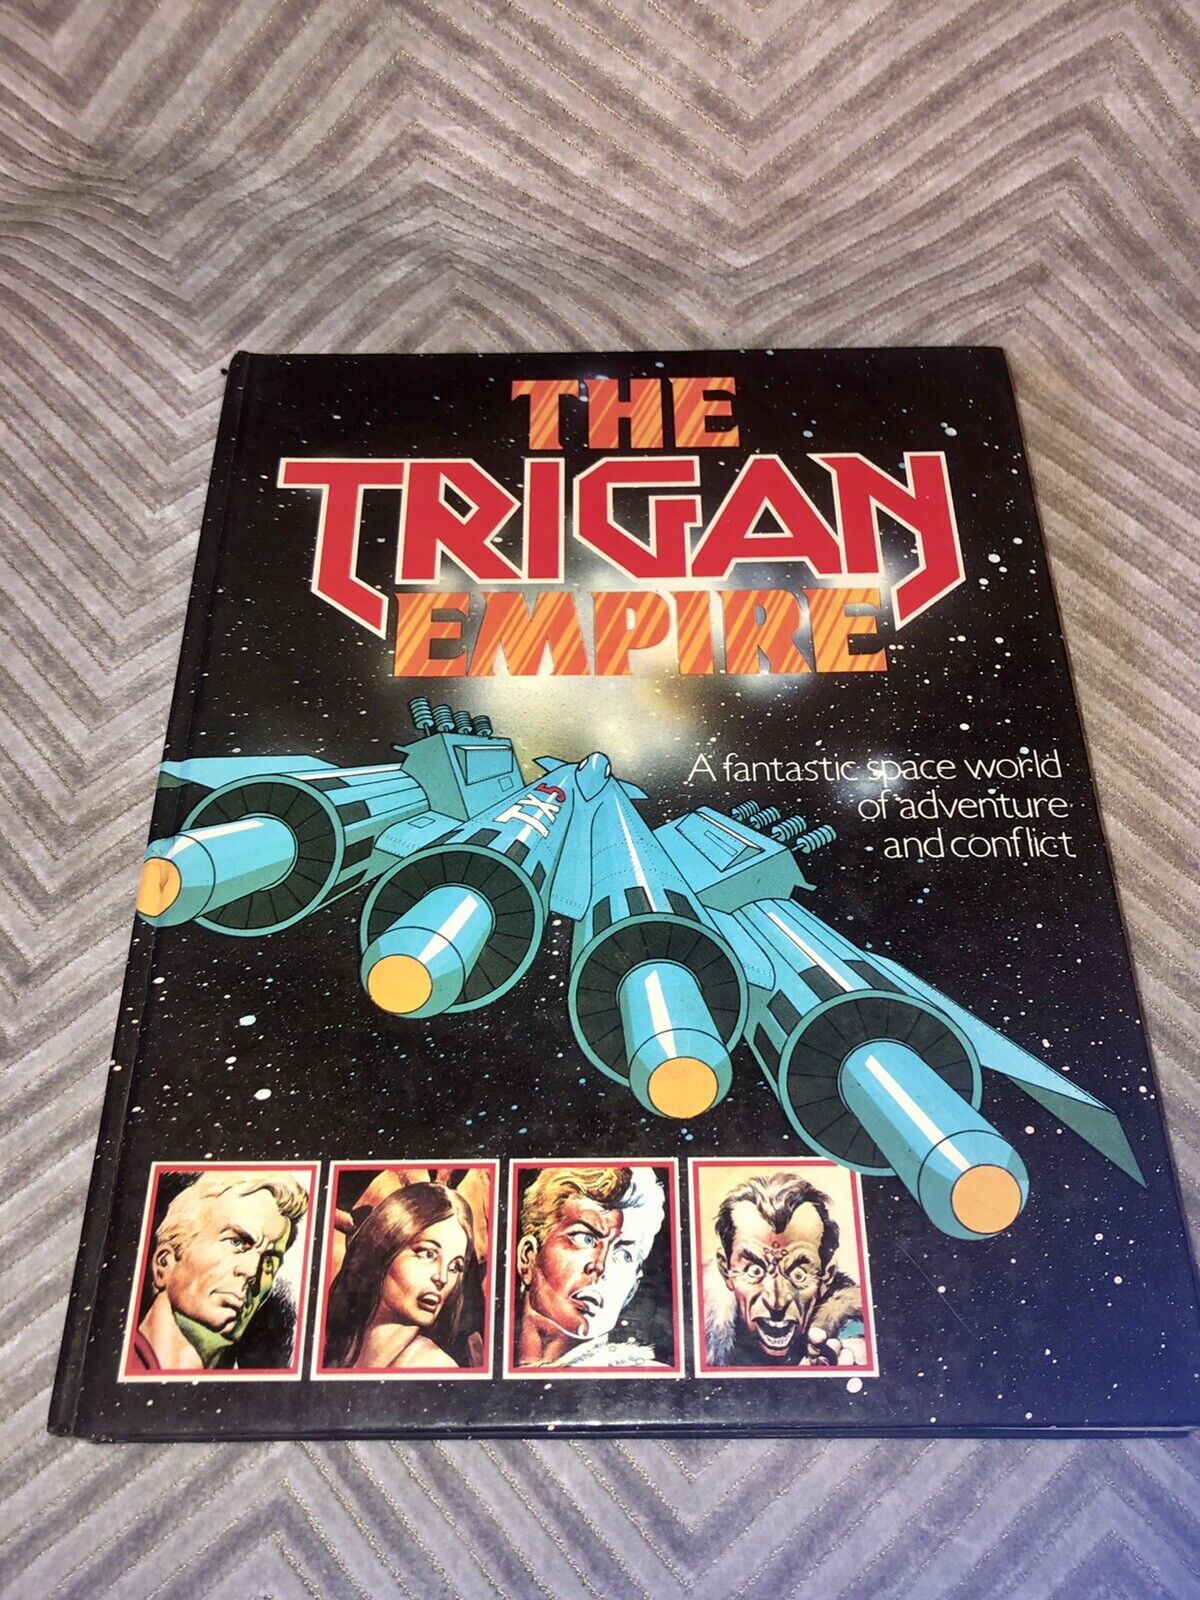 Vtg 1978 THE TRIGAN EMPIRE Don Lawrence, Published by Chartwell Hard Cover Book